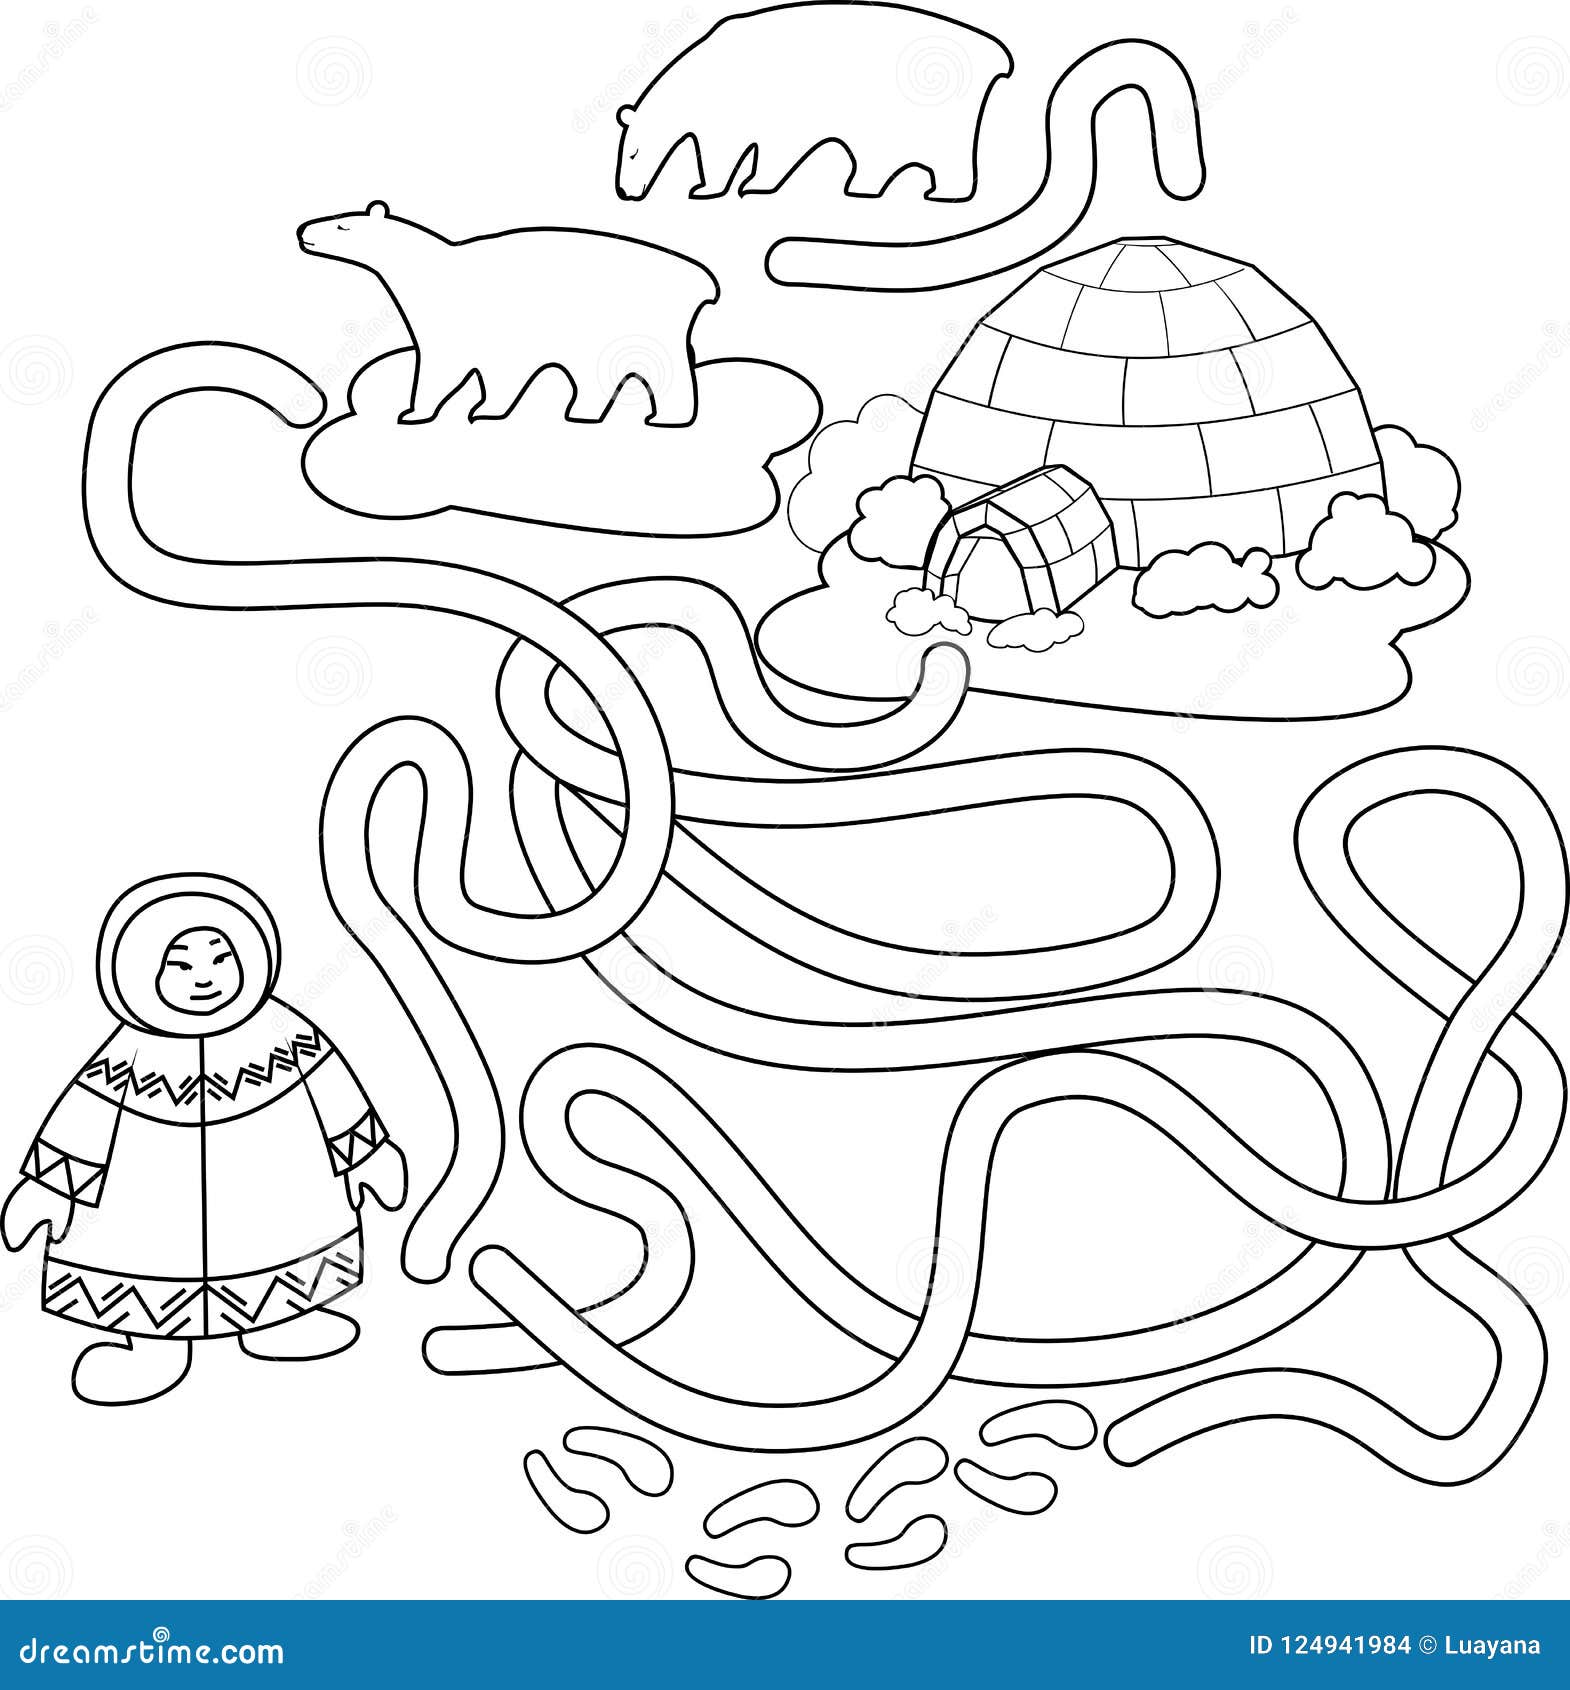 Coloring Page. Help the Eskimo Find the Way To Igloo Stock Vector ...